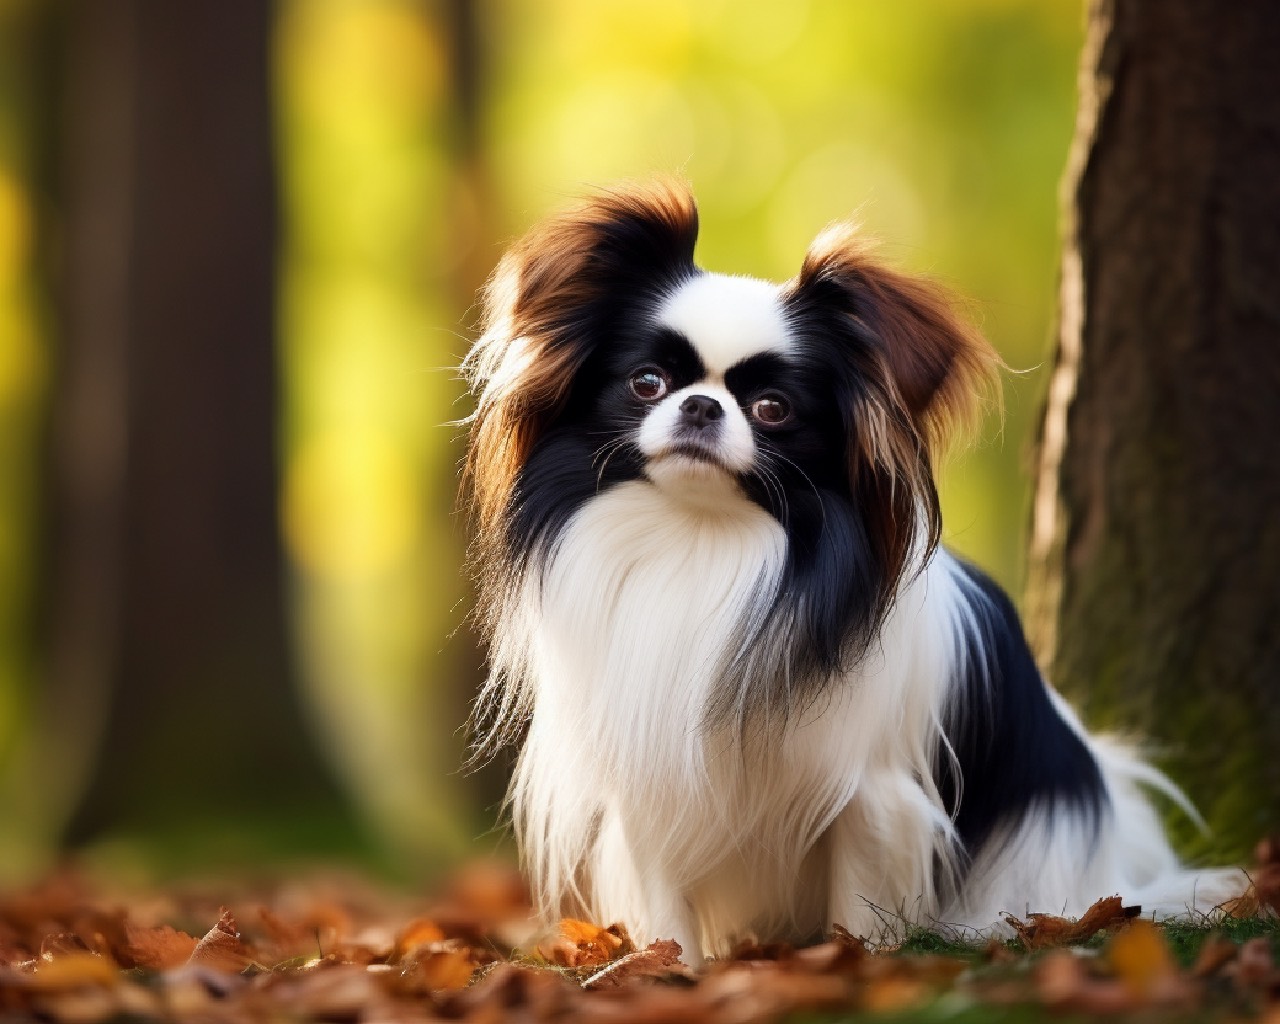 Japanese Chin Dog Breed in the park